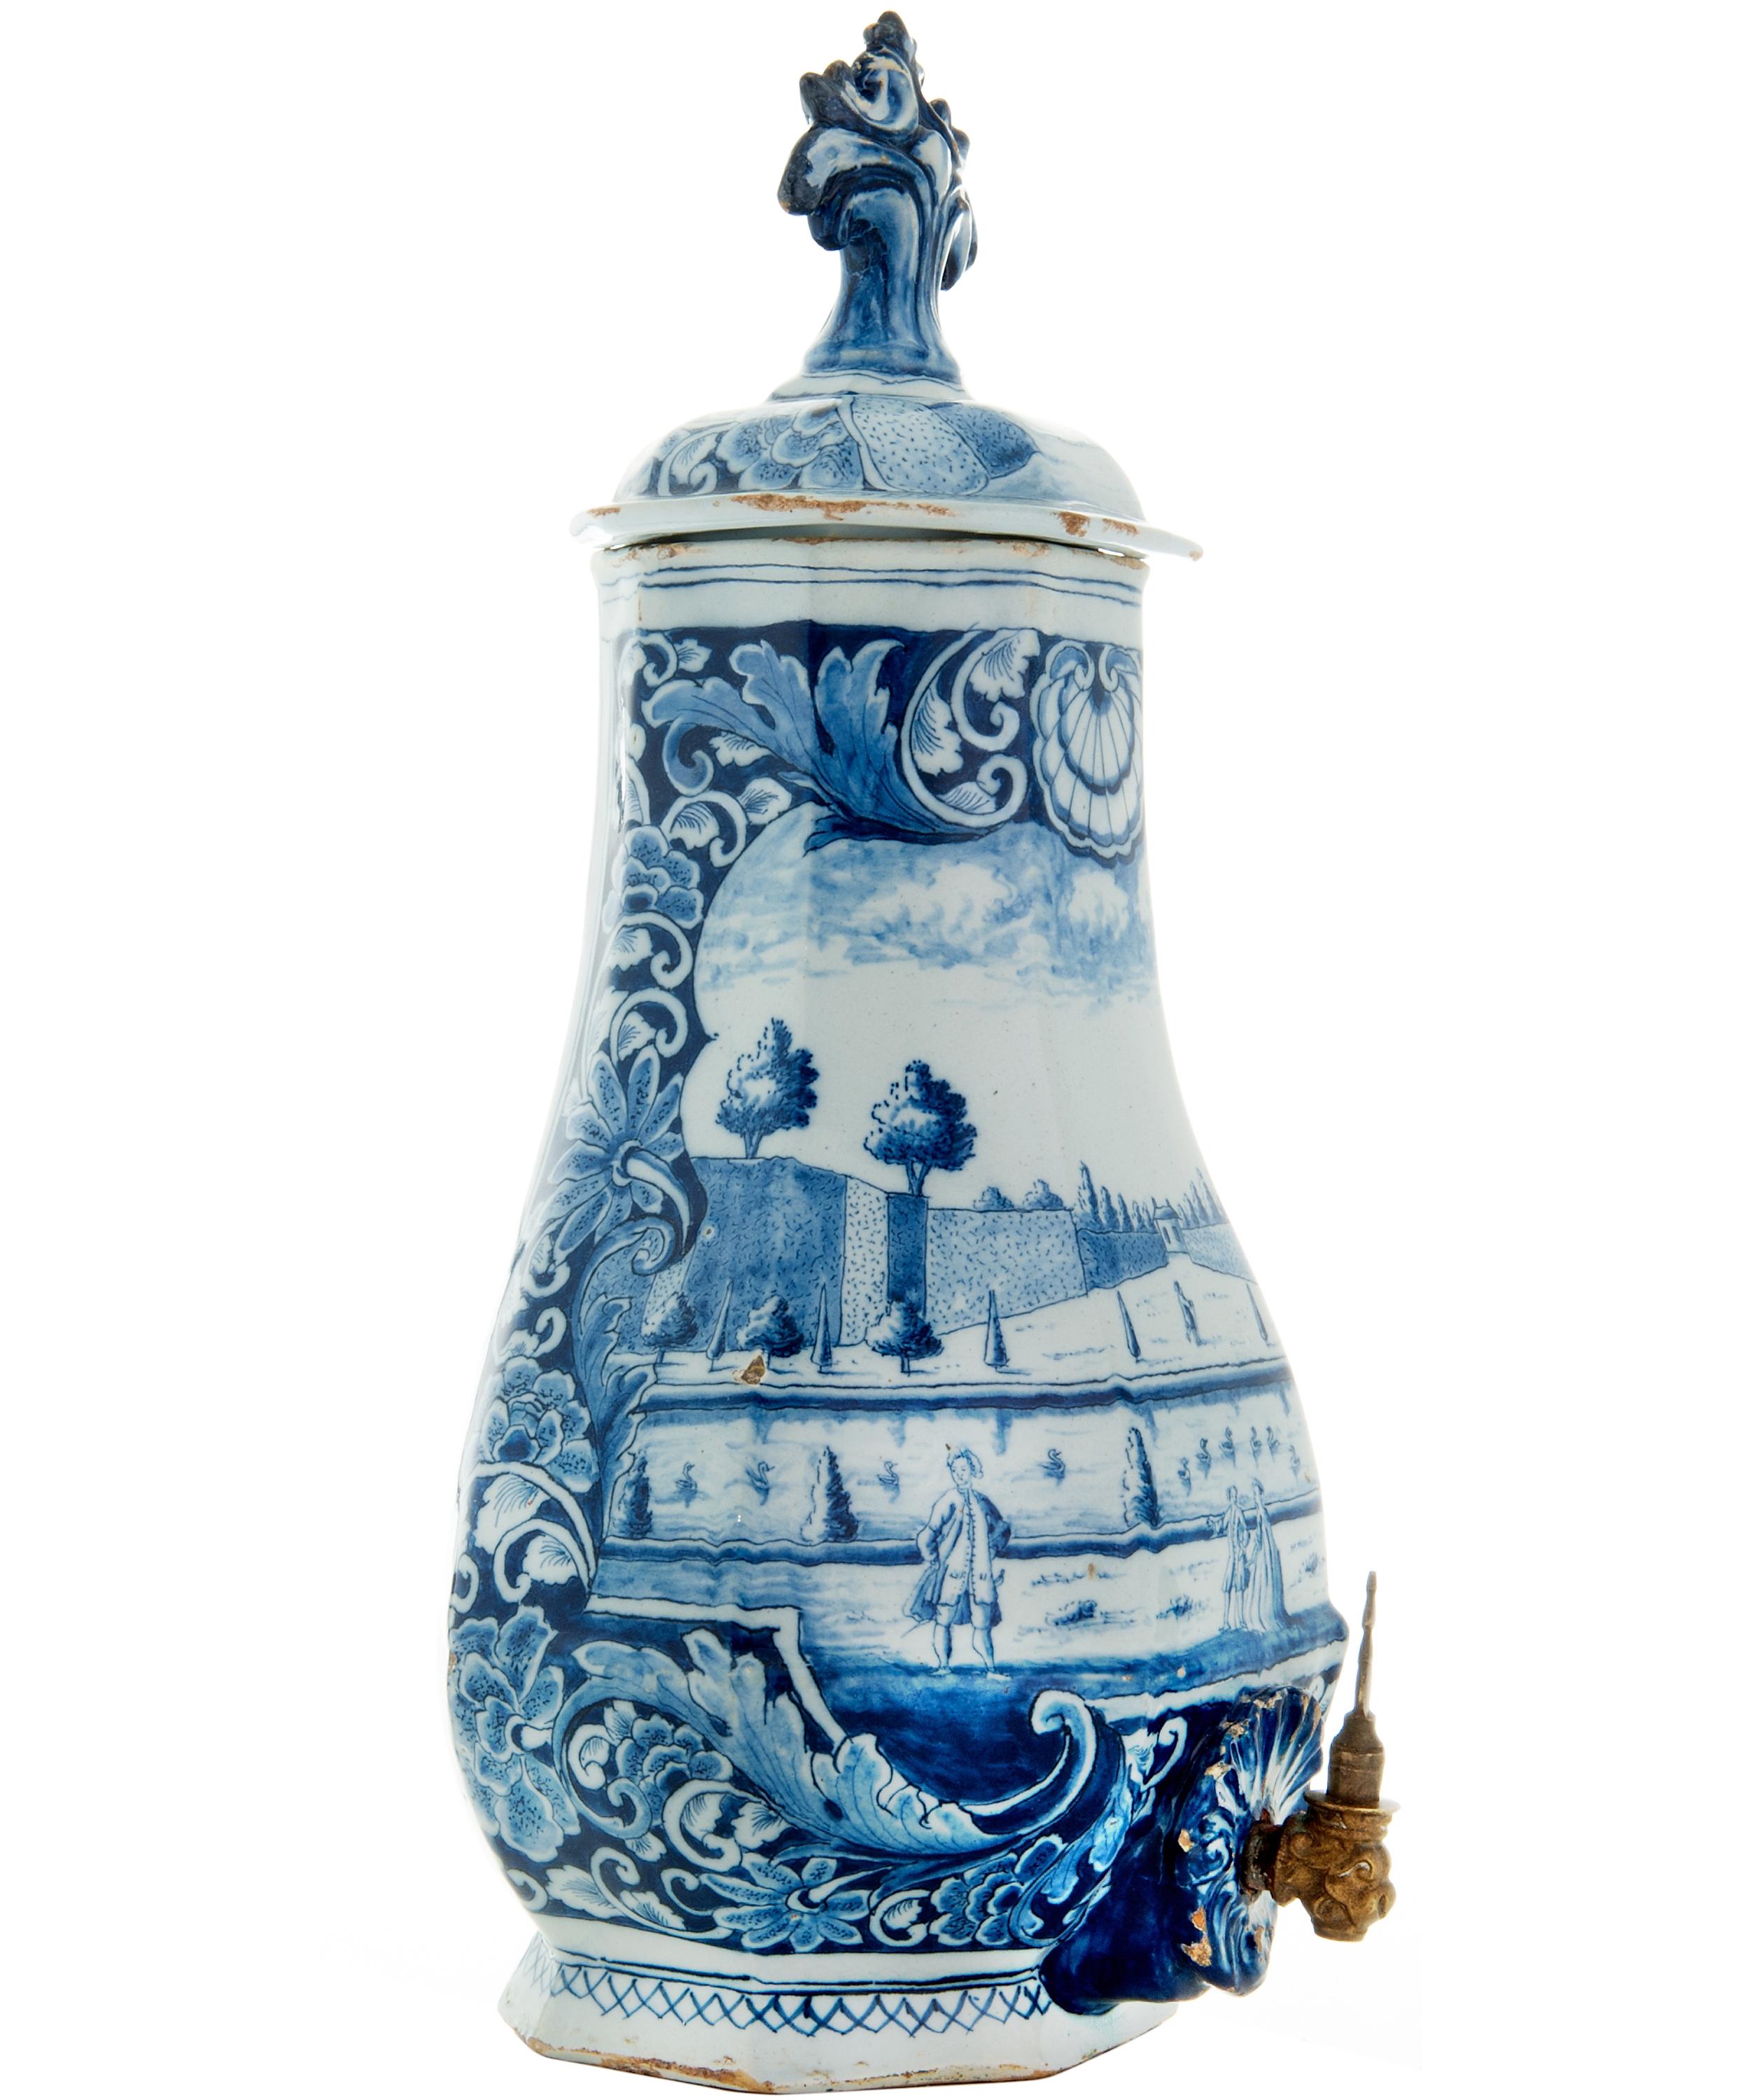 This fountain is a splendid example of a luxury utensil decorated entirely in blue - white faience. The object is richly decorated with personages in a garden. The fountain could be filled with water, it probably hung in a corridor or was part of a